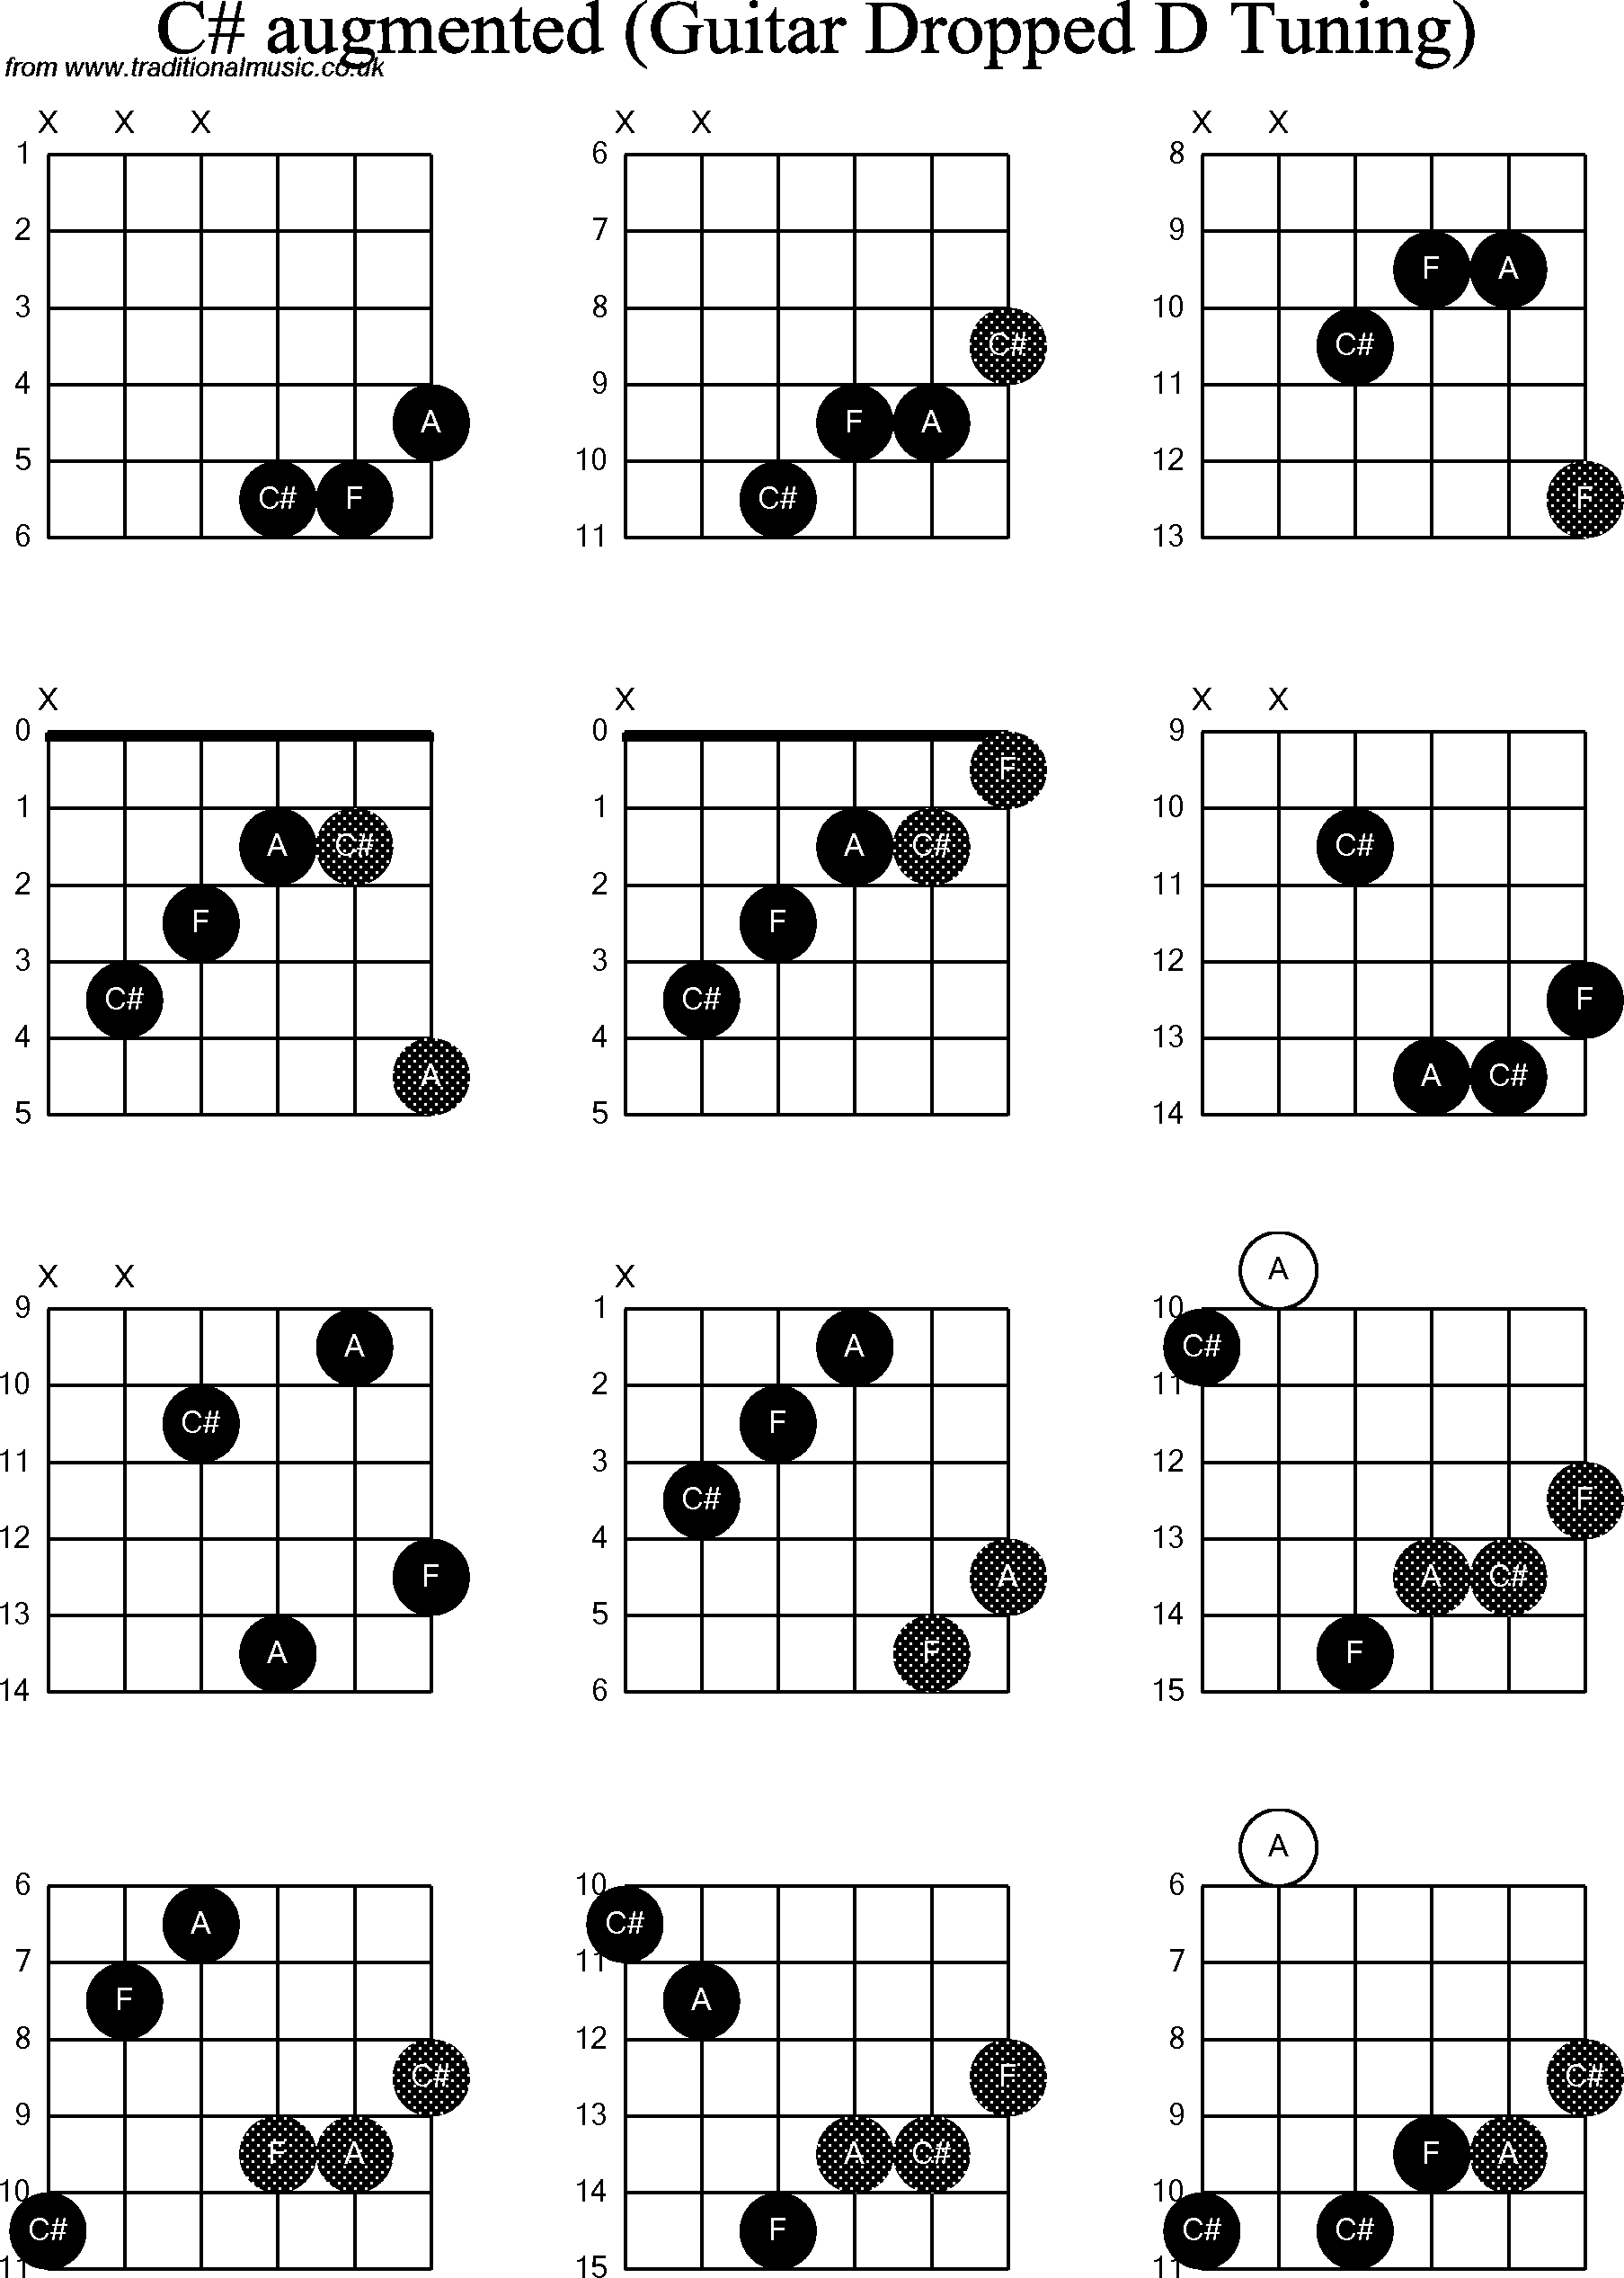 Chord diagrams for dropped D Guitar(DADGBE), C Sharp Augmented